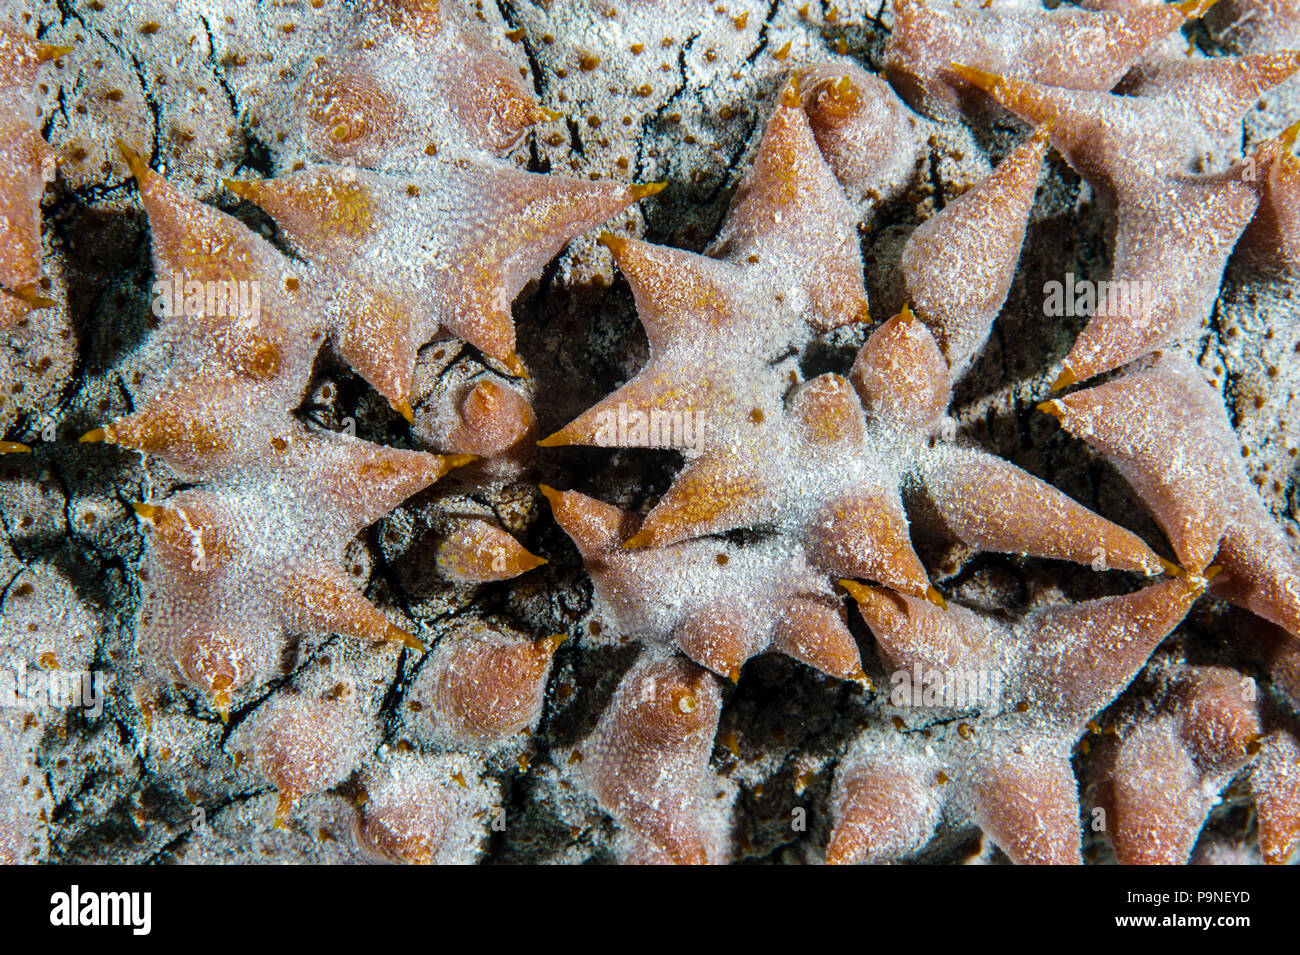 Large fleshy spikes cover the skin of the Pineapple Sea Cucumber to protect it from predators. Stock Photo